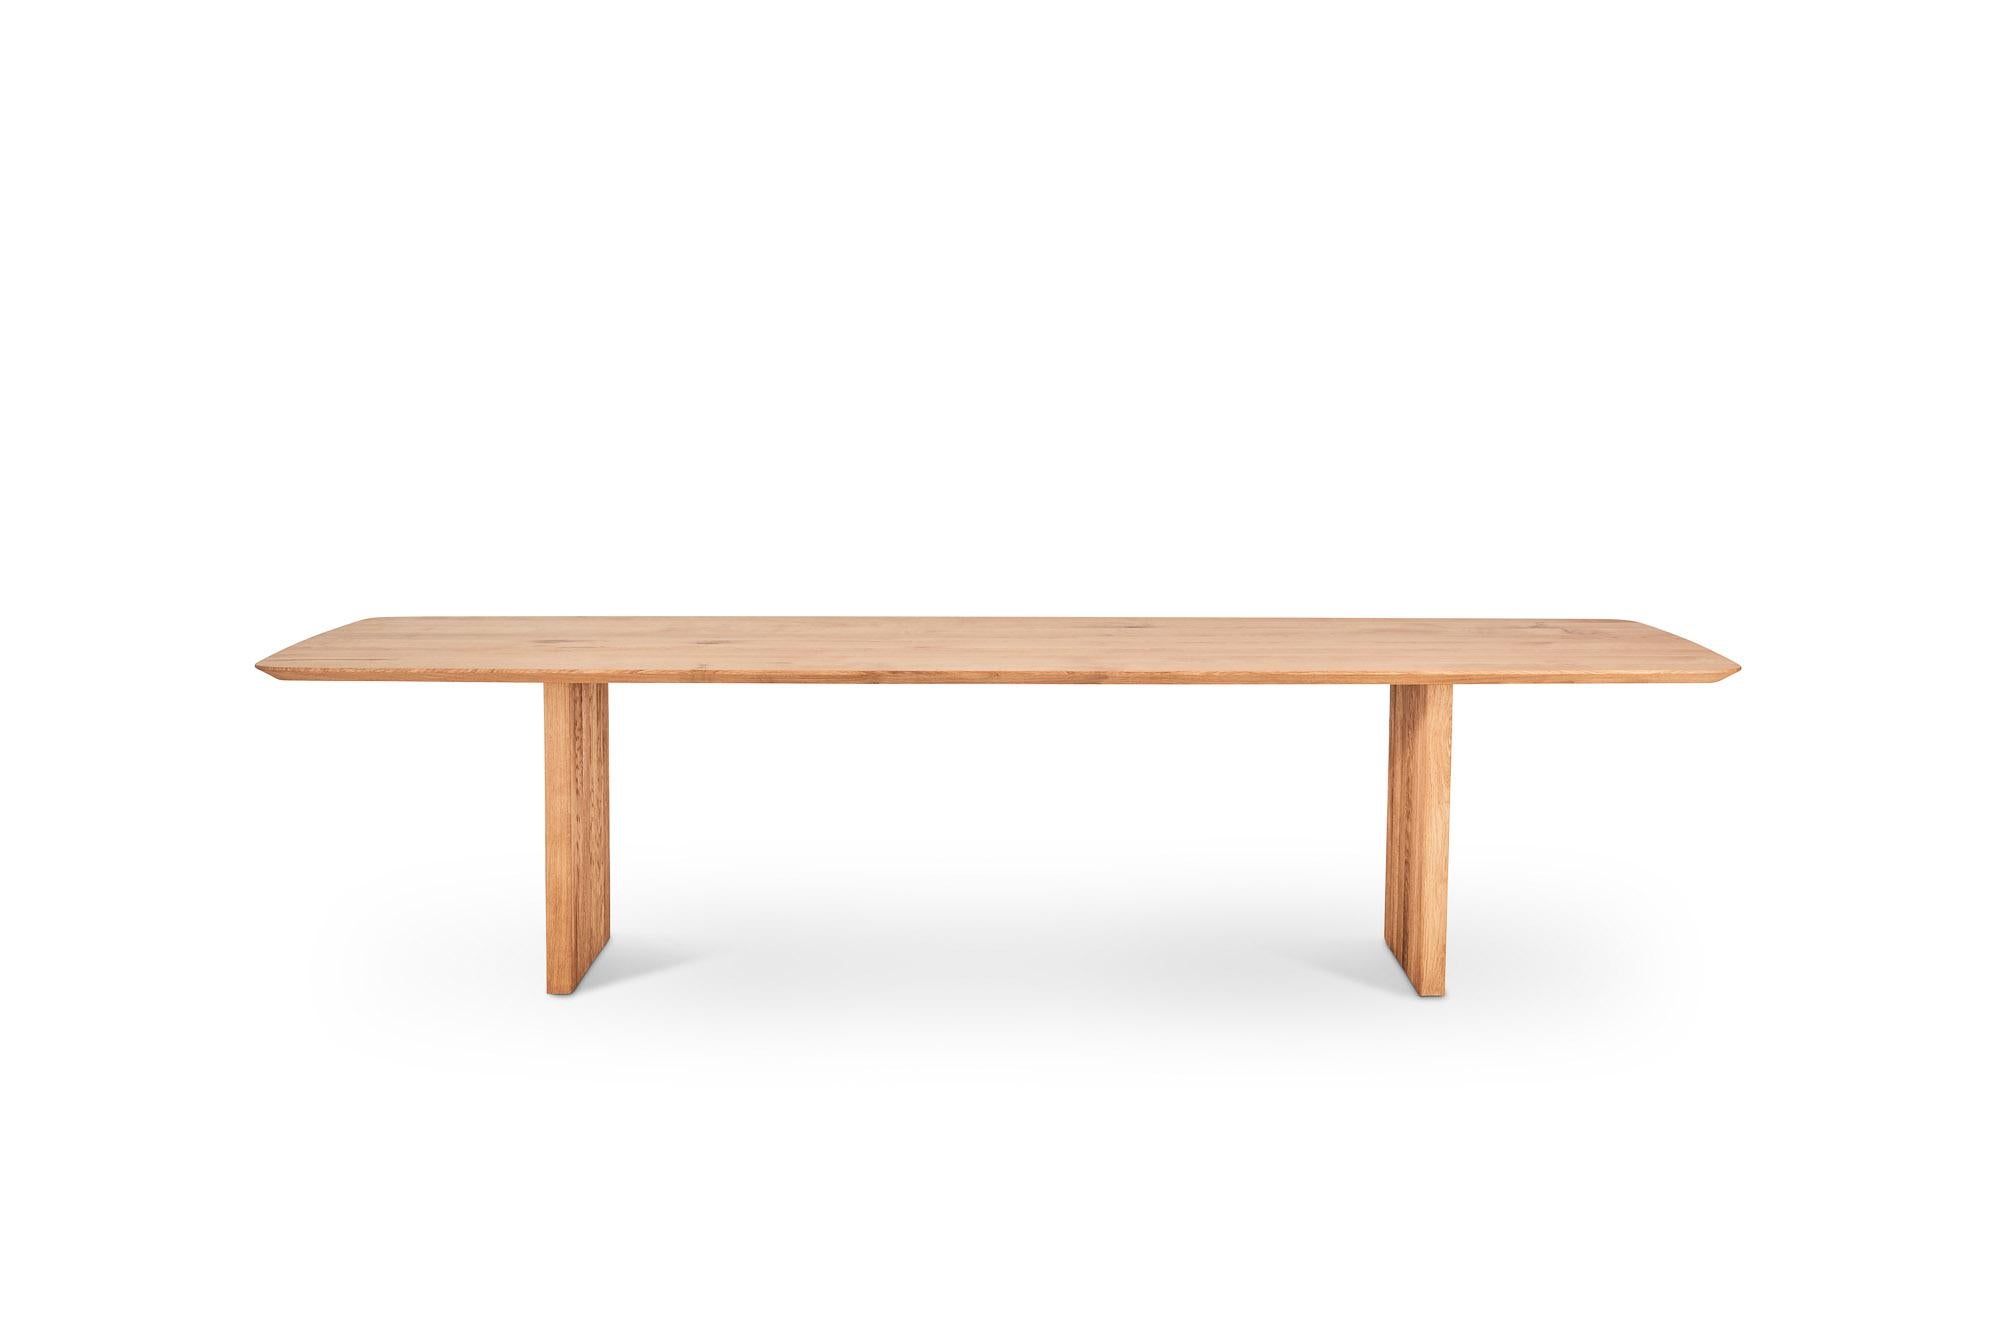 TEN dining table, rectangular, 370cm
Solid wood tabletop and legs. Handmade in Denmark.

Height: 72 or 74 cm

Tabletop dimensions:
– 200 x 95 cm
– 240 x 105 cm
– 270 x 105 cm
– 300 x 105 cm
– 340 x 105 cm
– 370 x 105 cm
– 400 x 105